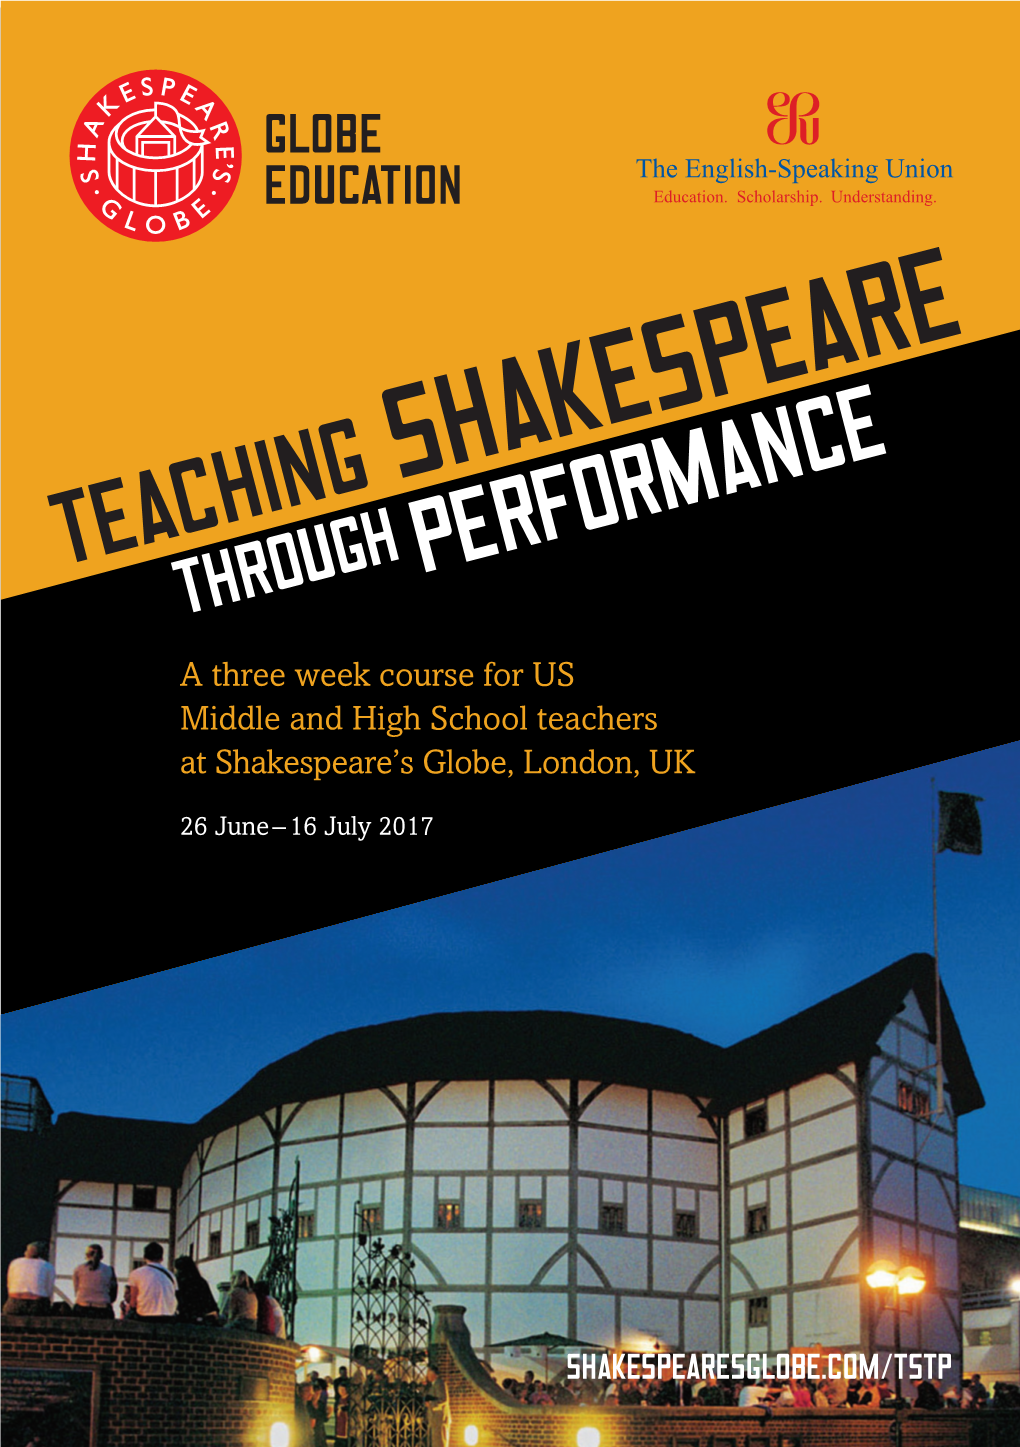 Shakespeare Teaching Performance Through a Three Week Course for US Middle and High School Teachers at Shakespeare’S Globe, London, UK